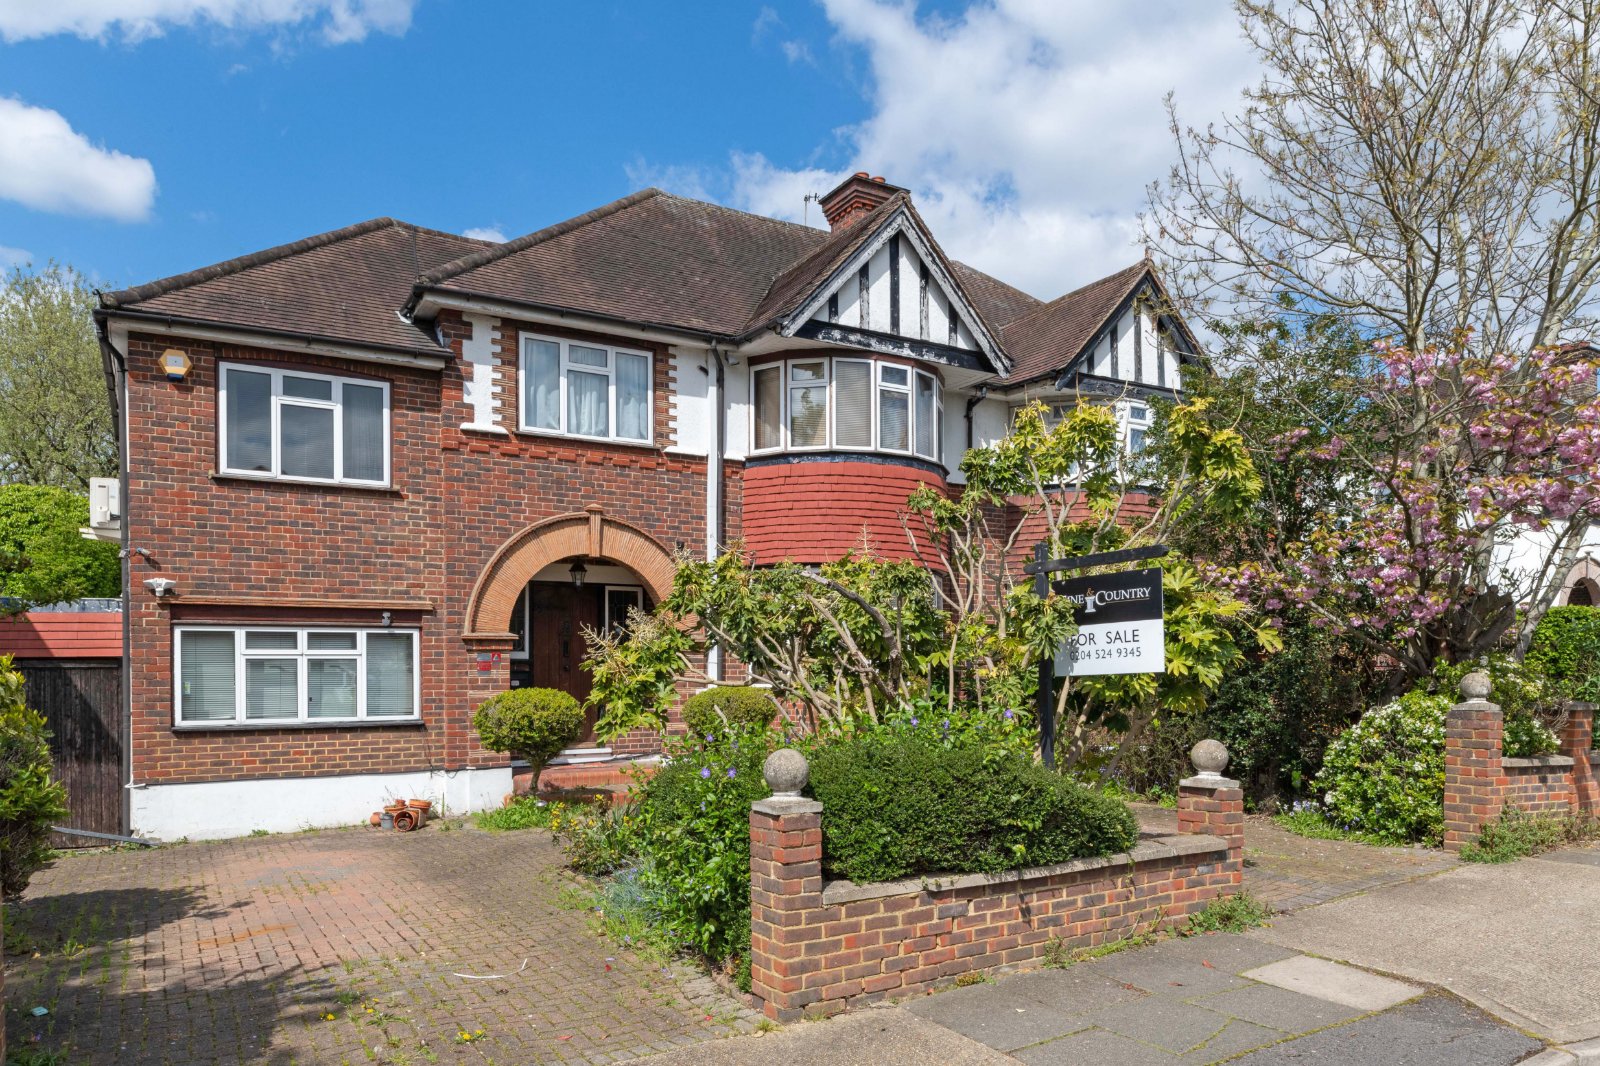 3 bedroom semi-detached house for sale in Rickmansworth